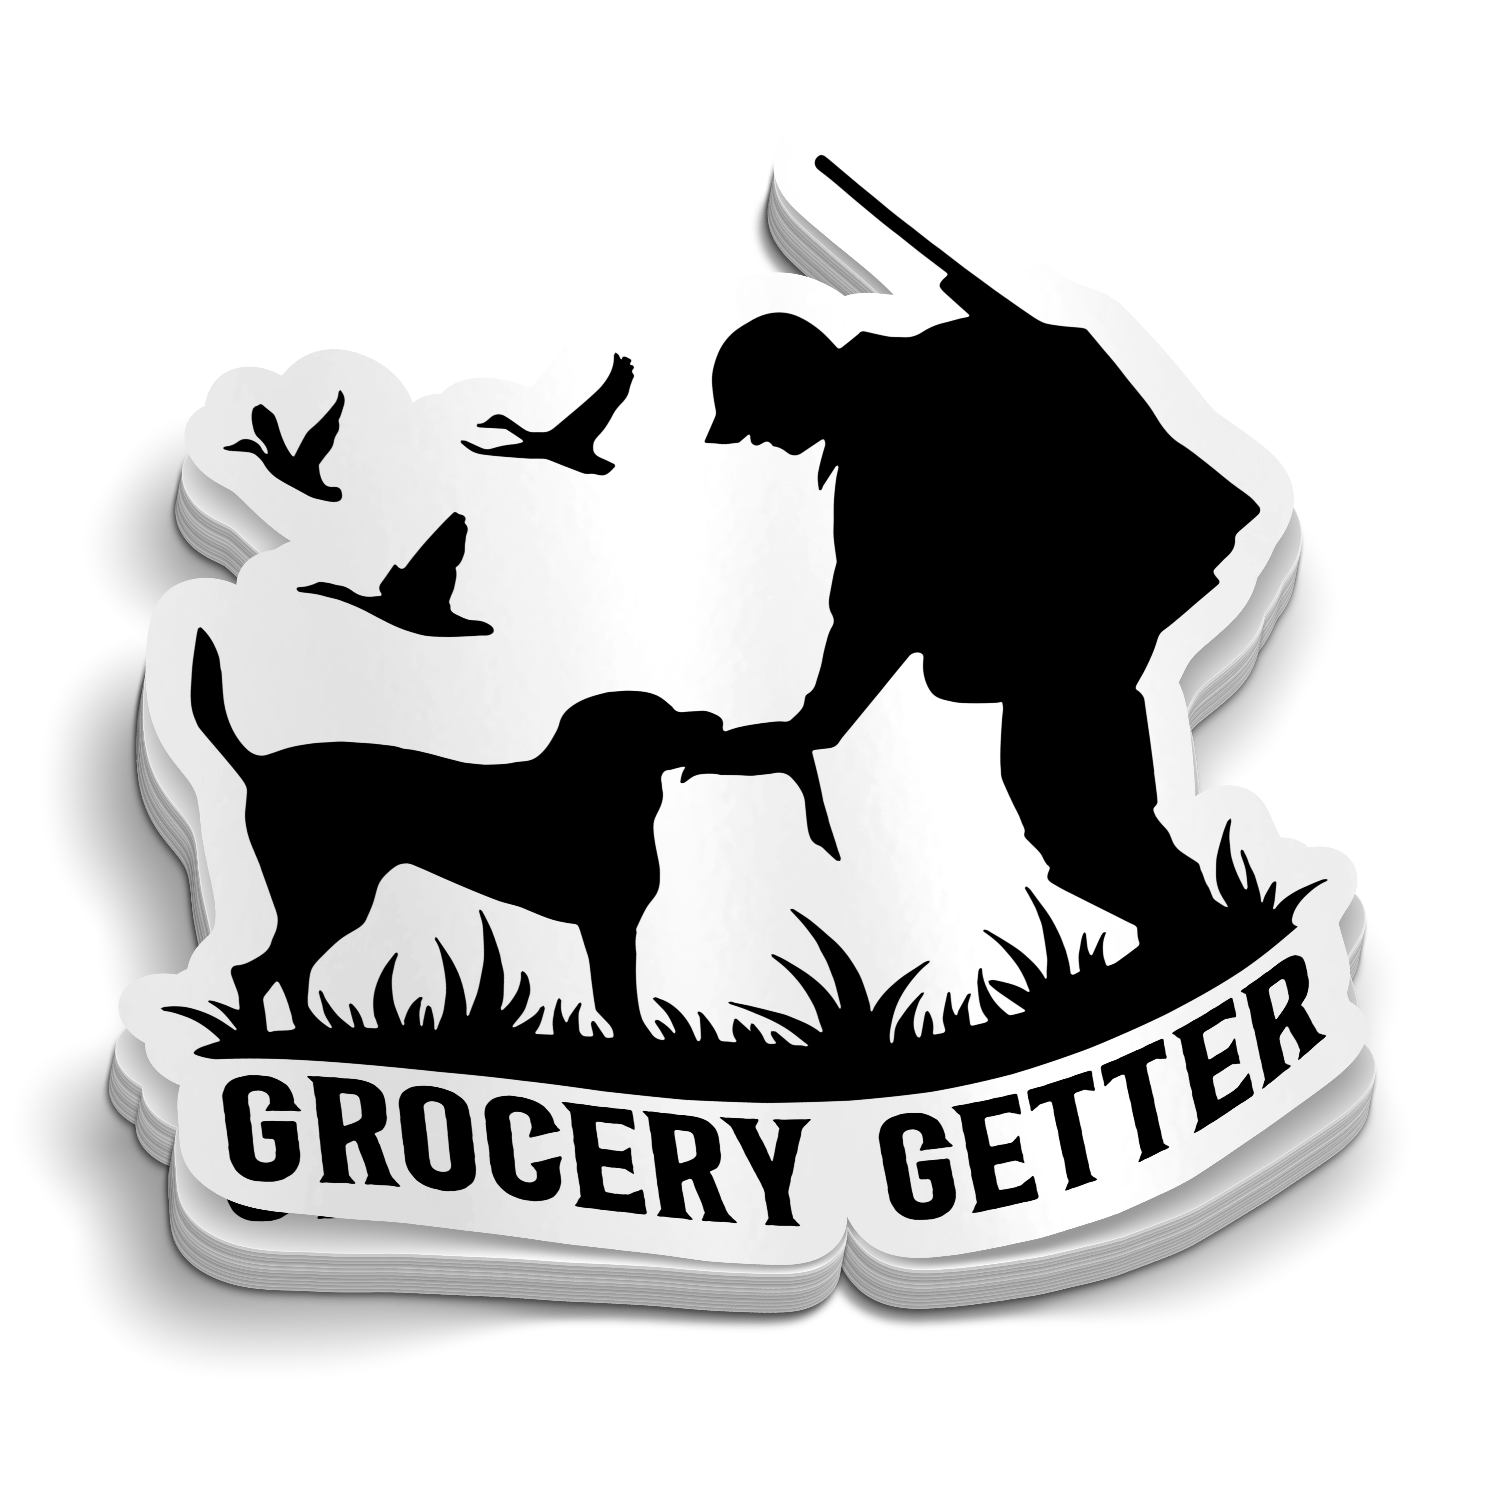 Grocery Getter - Funny Hunting Sticker